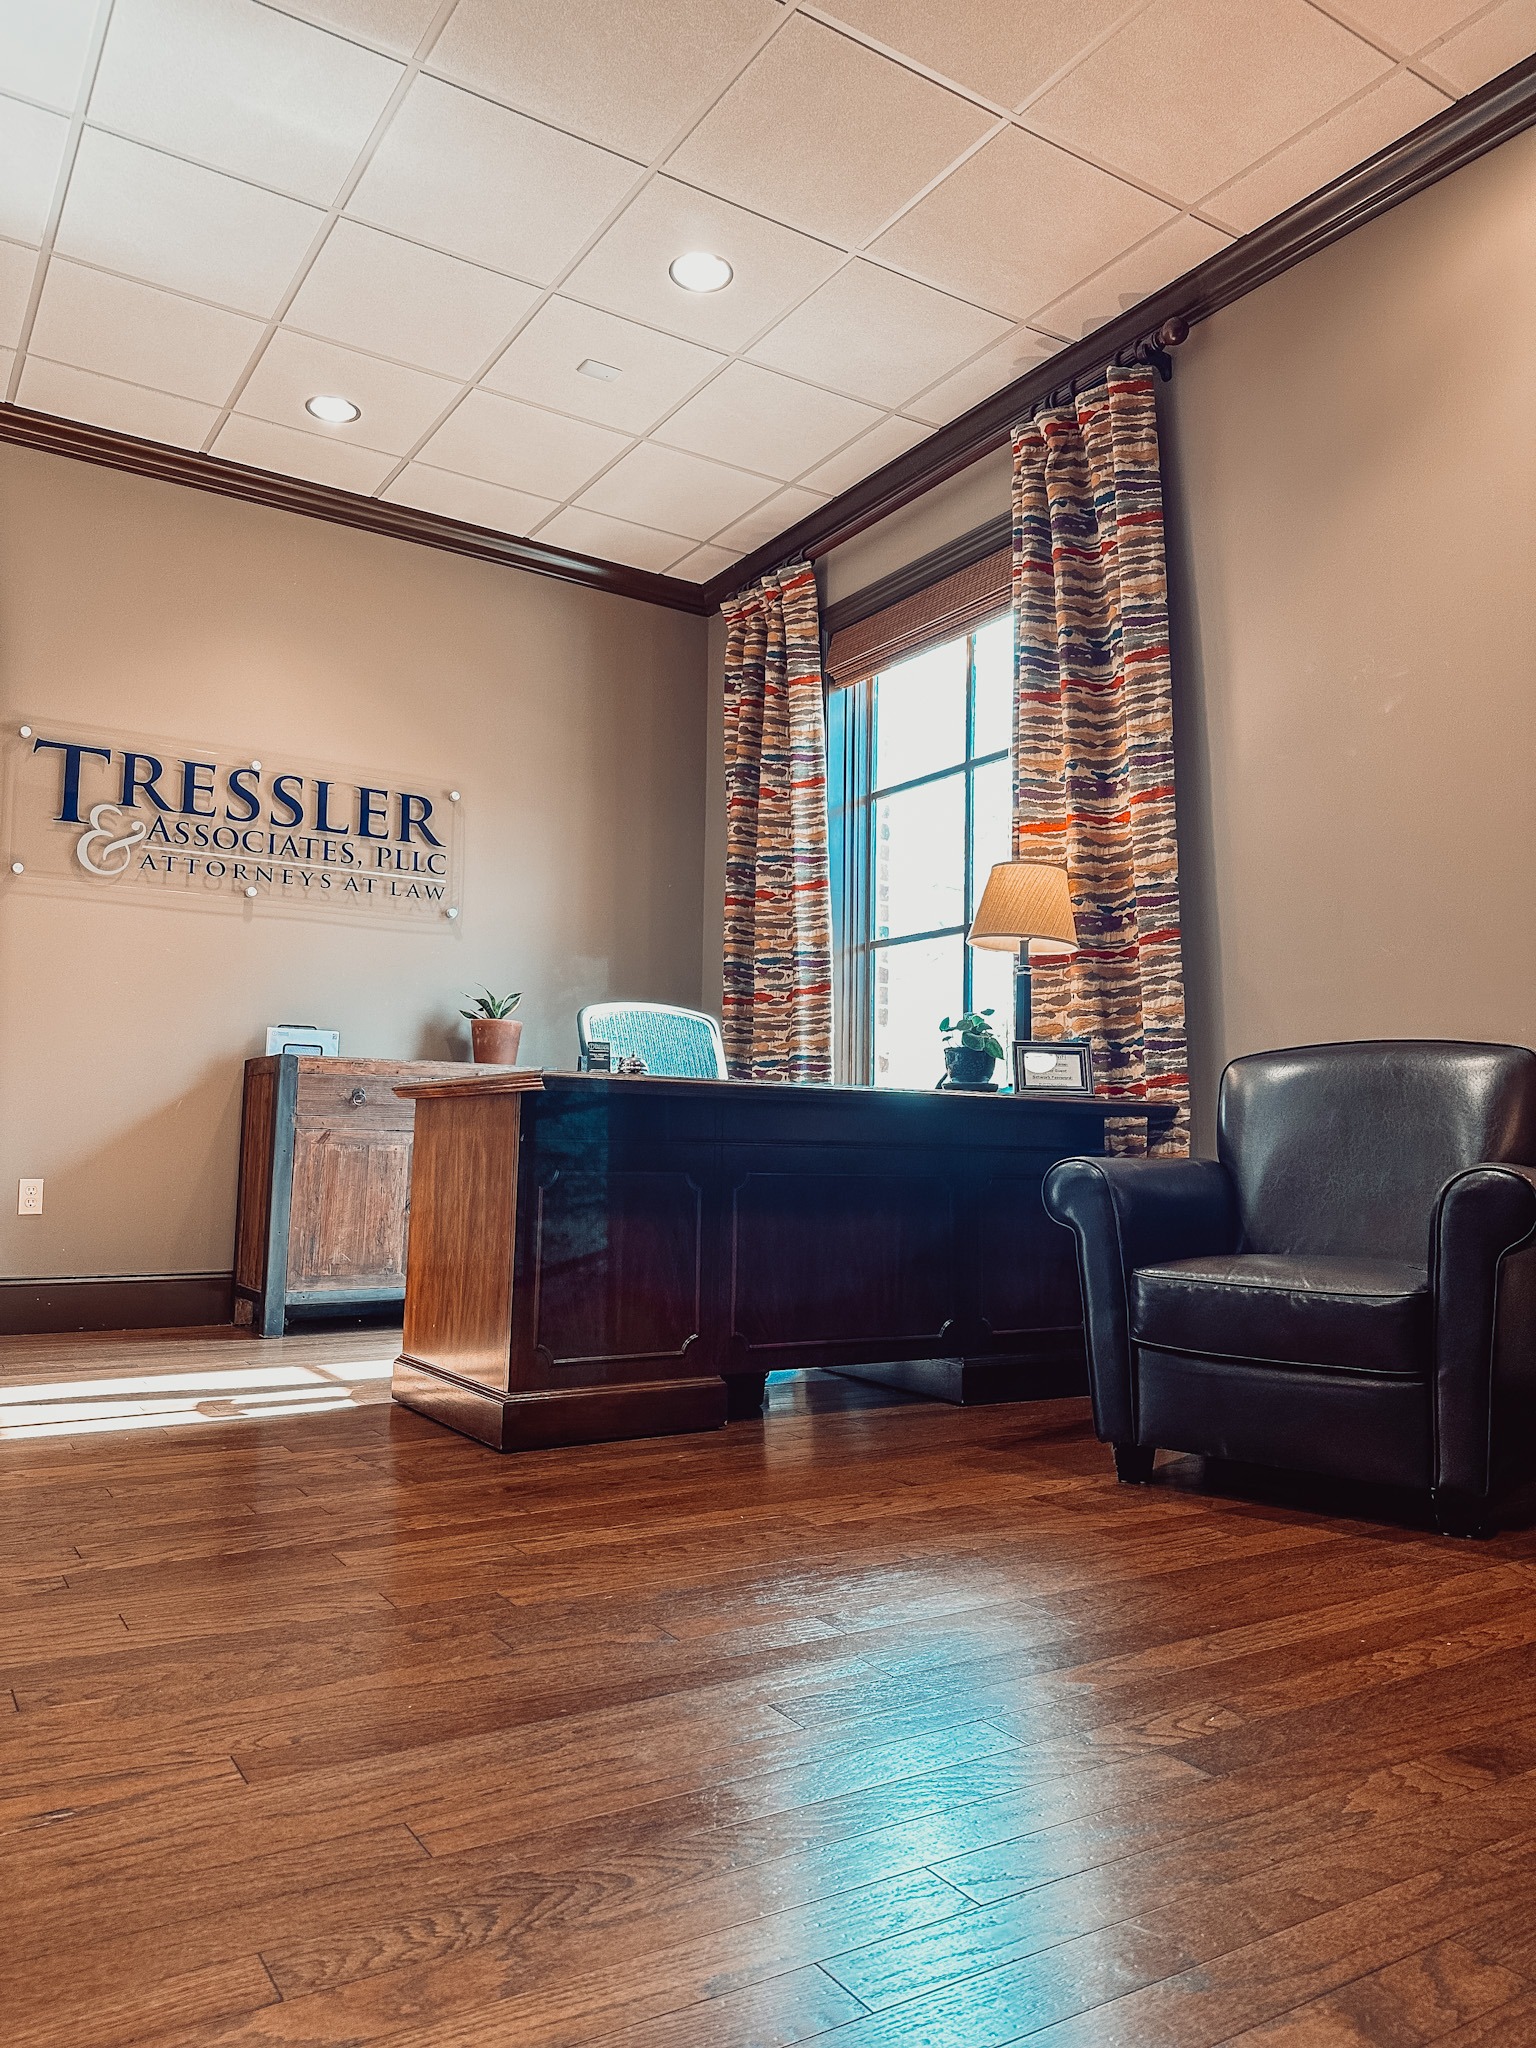 Tressler & Associates, PLLC Lebanon Office front lobby picturing wood floors, wooden desk and leather chair with sunlight coming through window